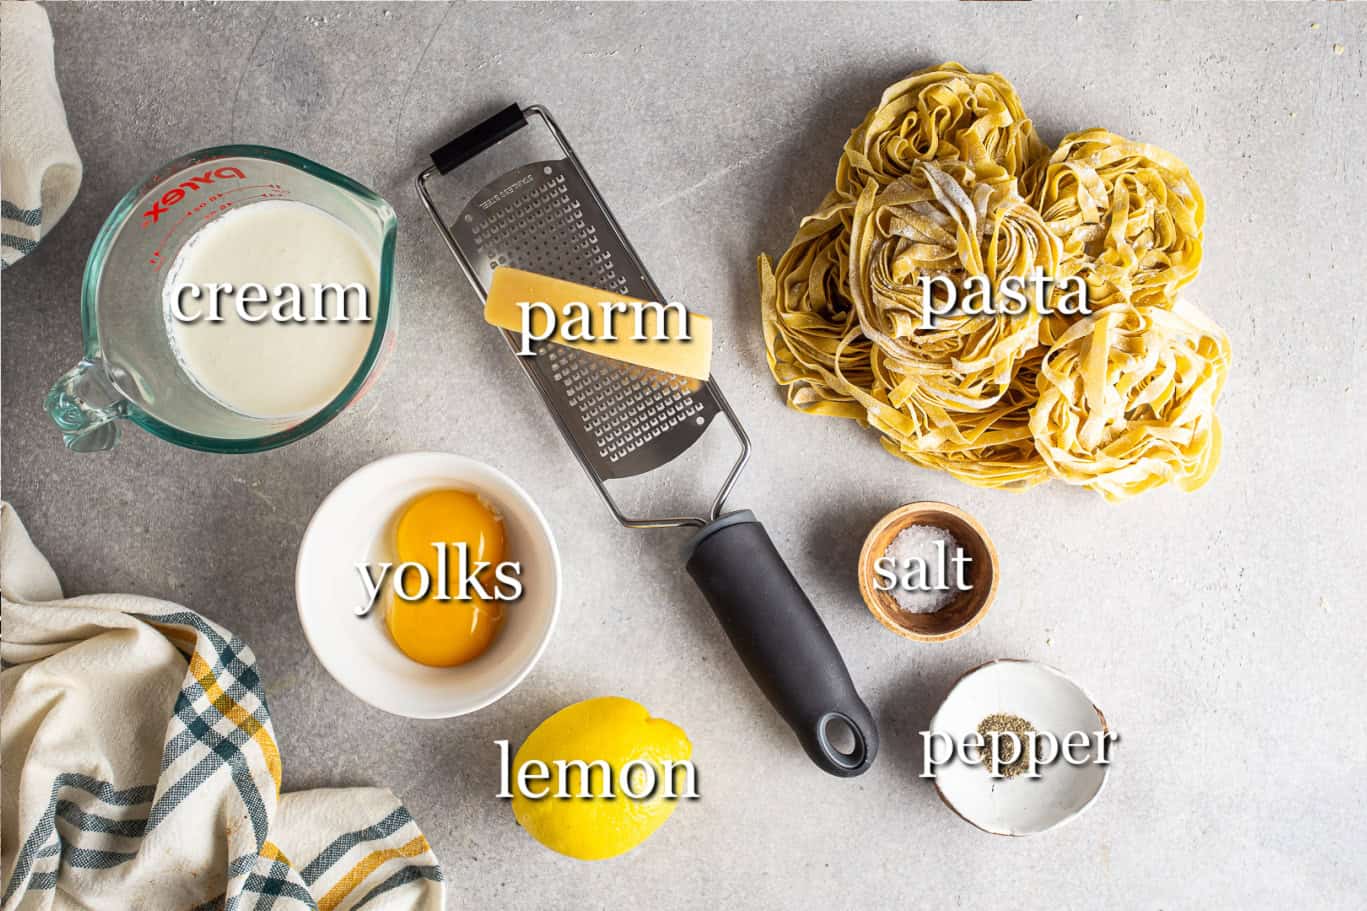 Ingredients for making lemon pasta, with text labels.